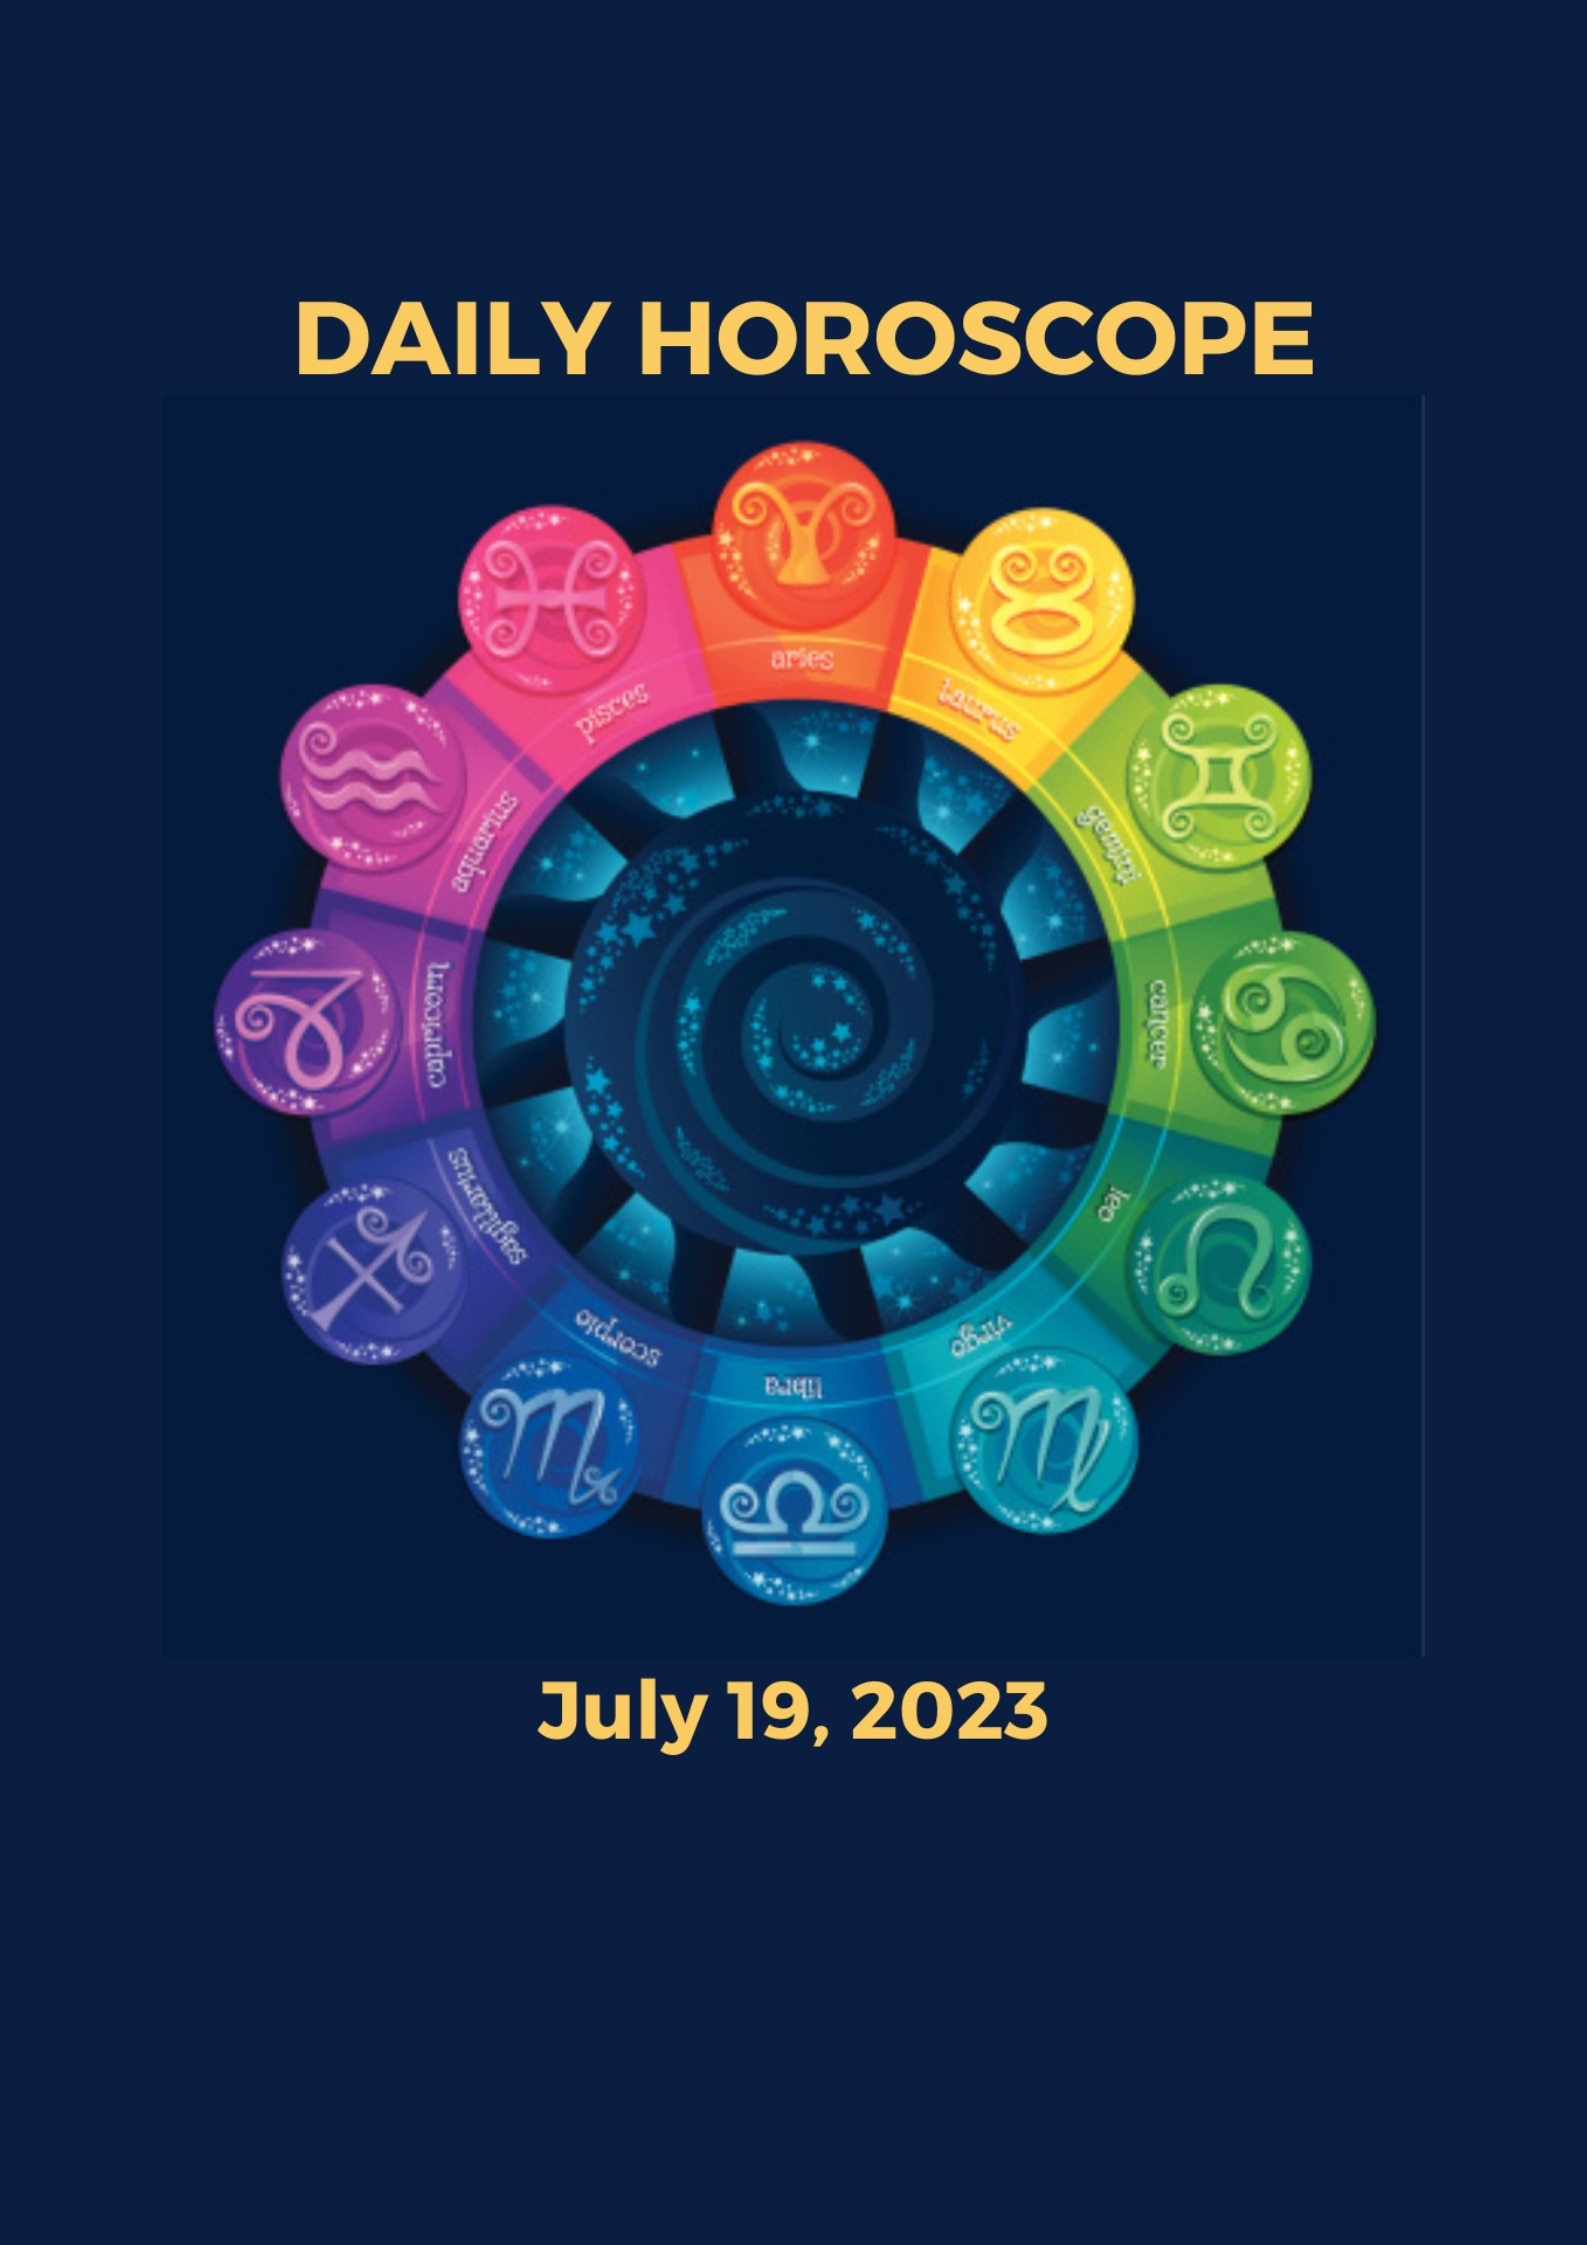 Daily Horoscope, July 19 Predictions For All 12 Zodiac Signs